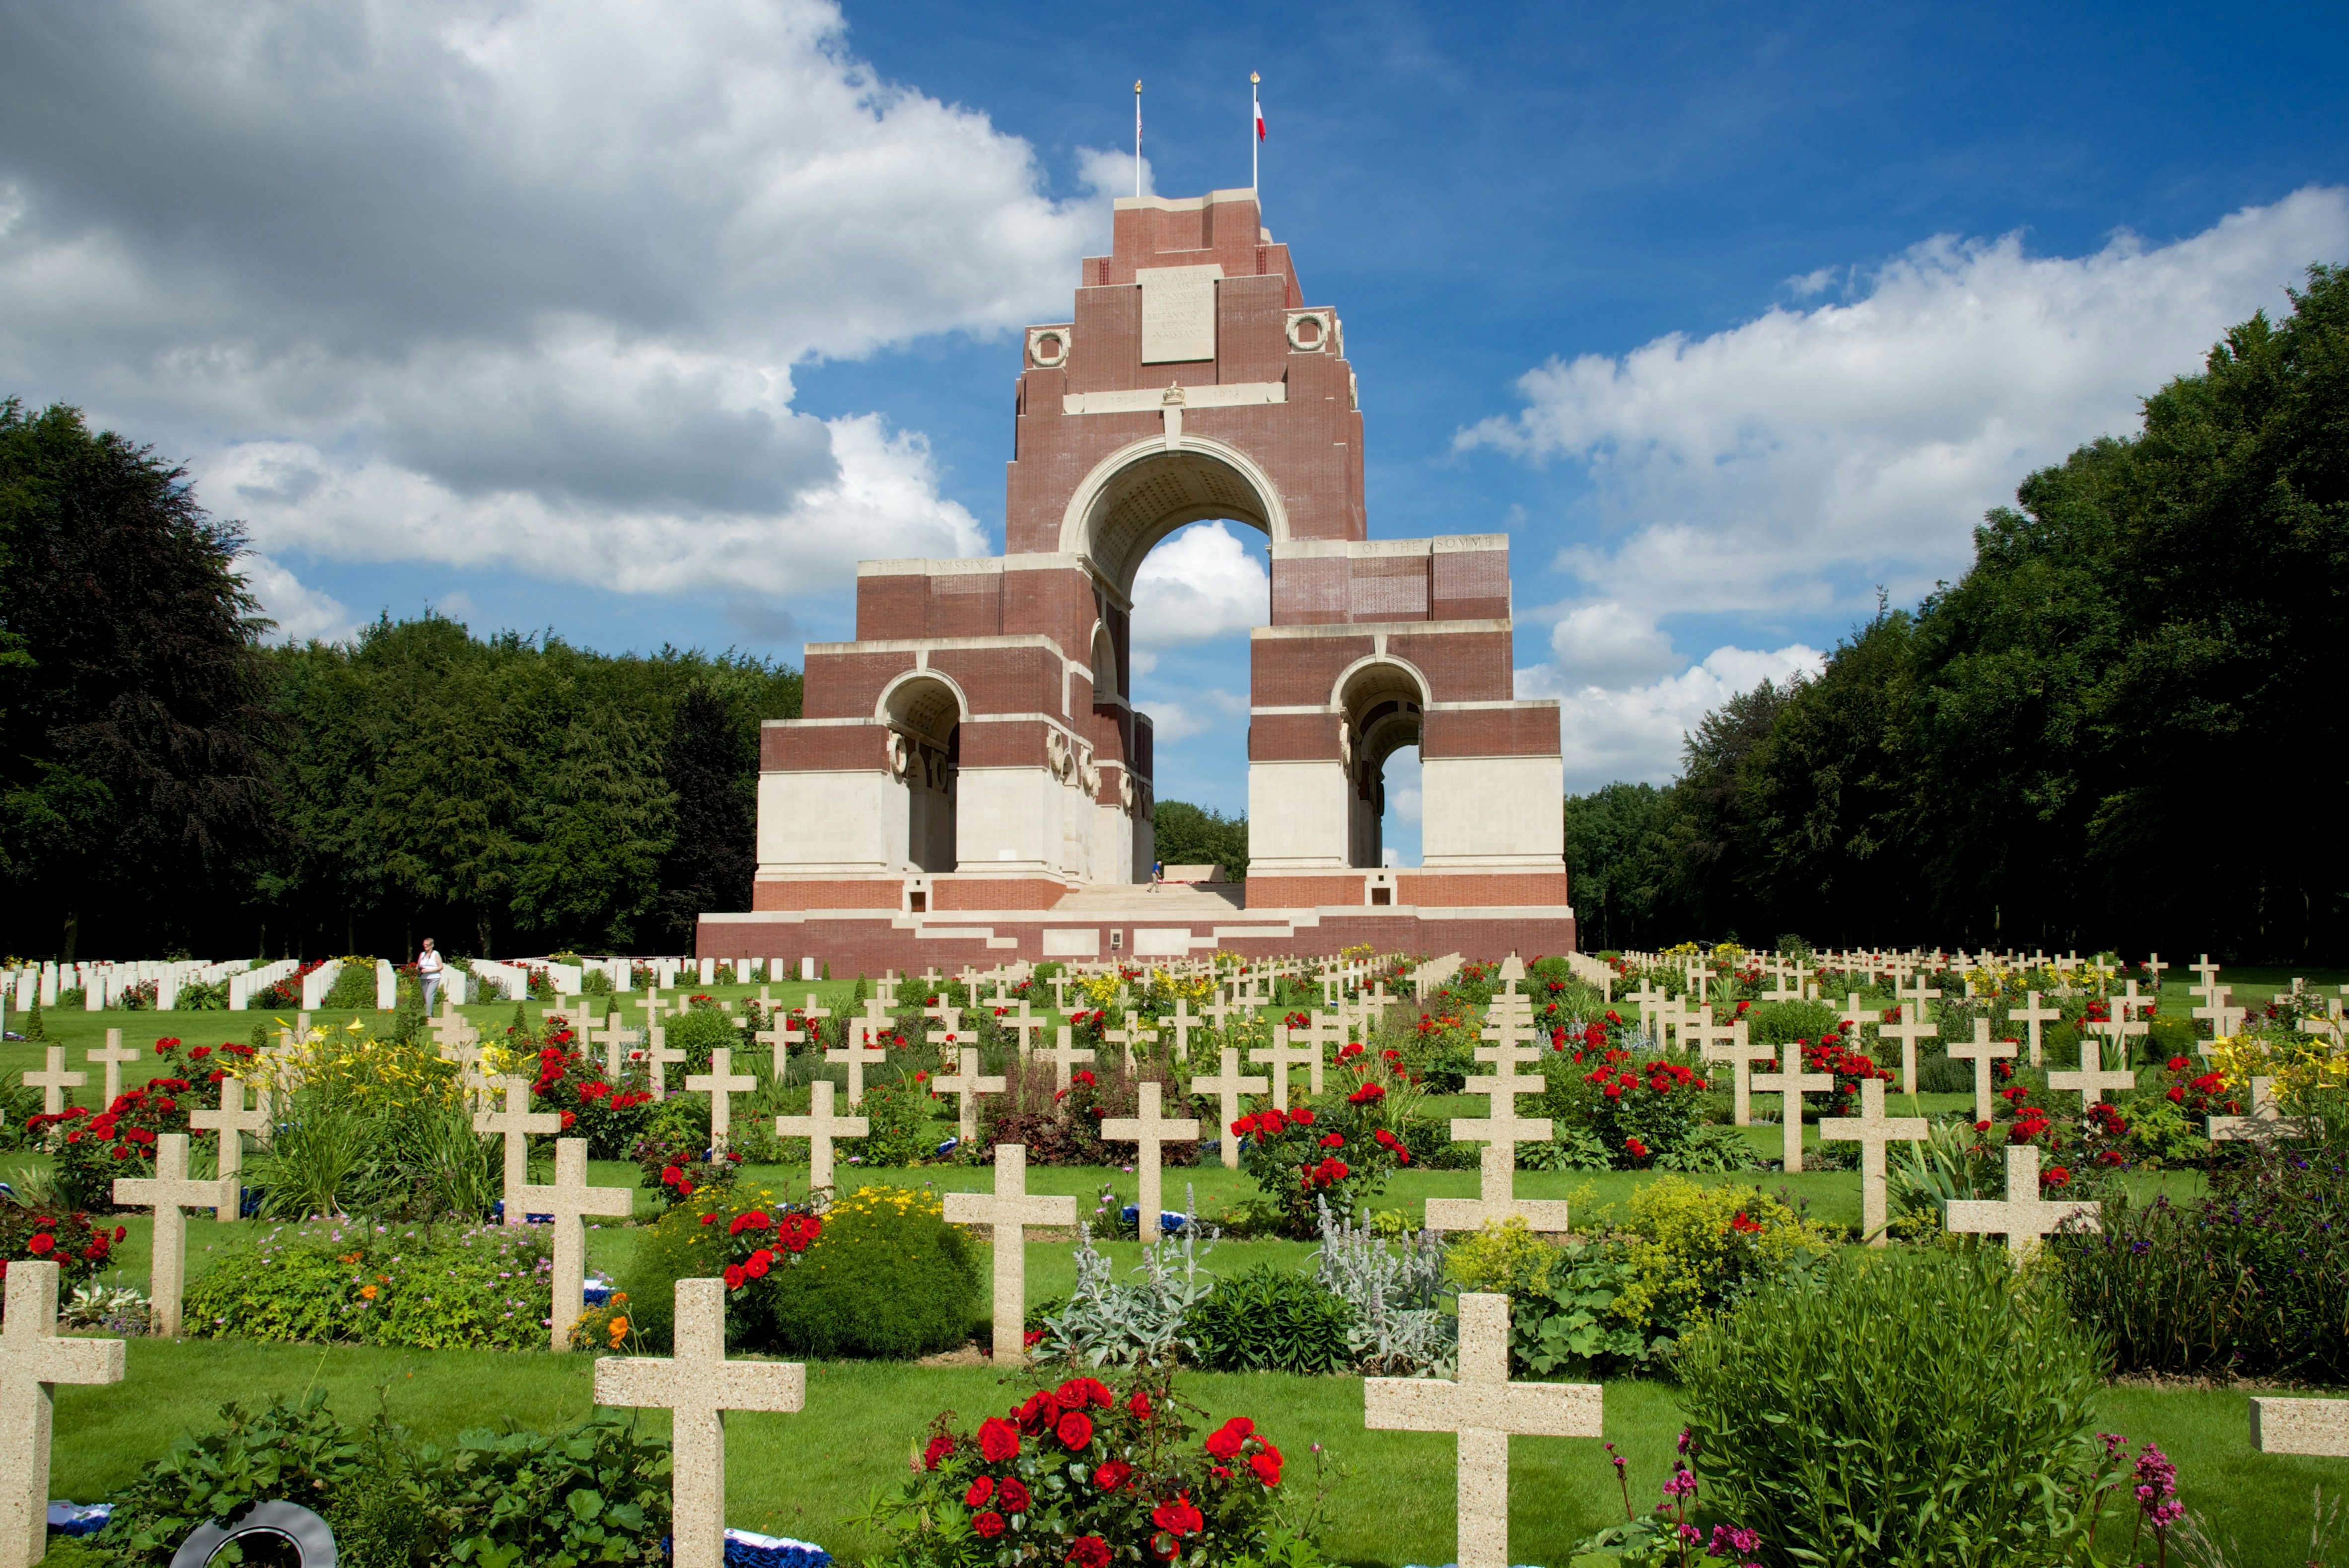 Thiepval Memorial in France; a memorial and burial site to some of those who died during the Battle of the Somme in the First World War. The monument is a large arched structure, while the surrounding laws are filled with poppies and small crosses acting as tombstones.